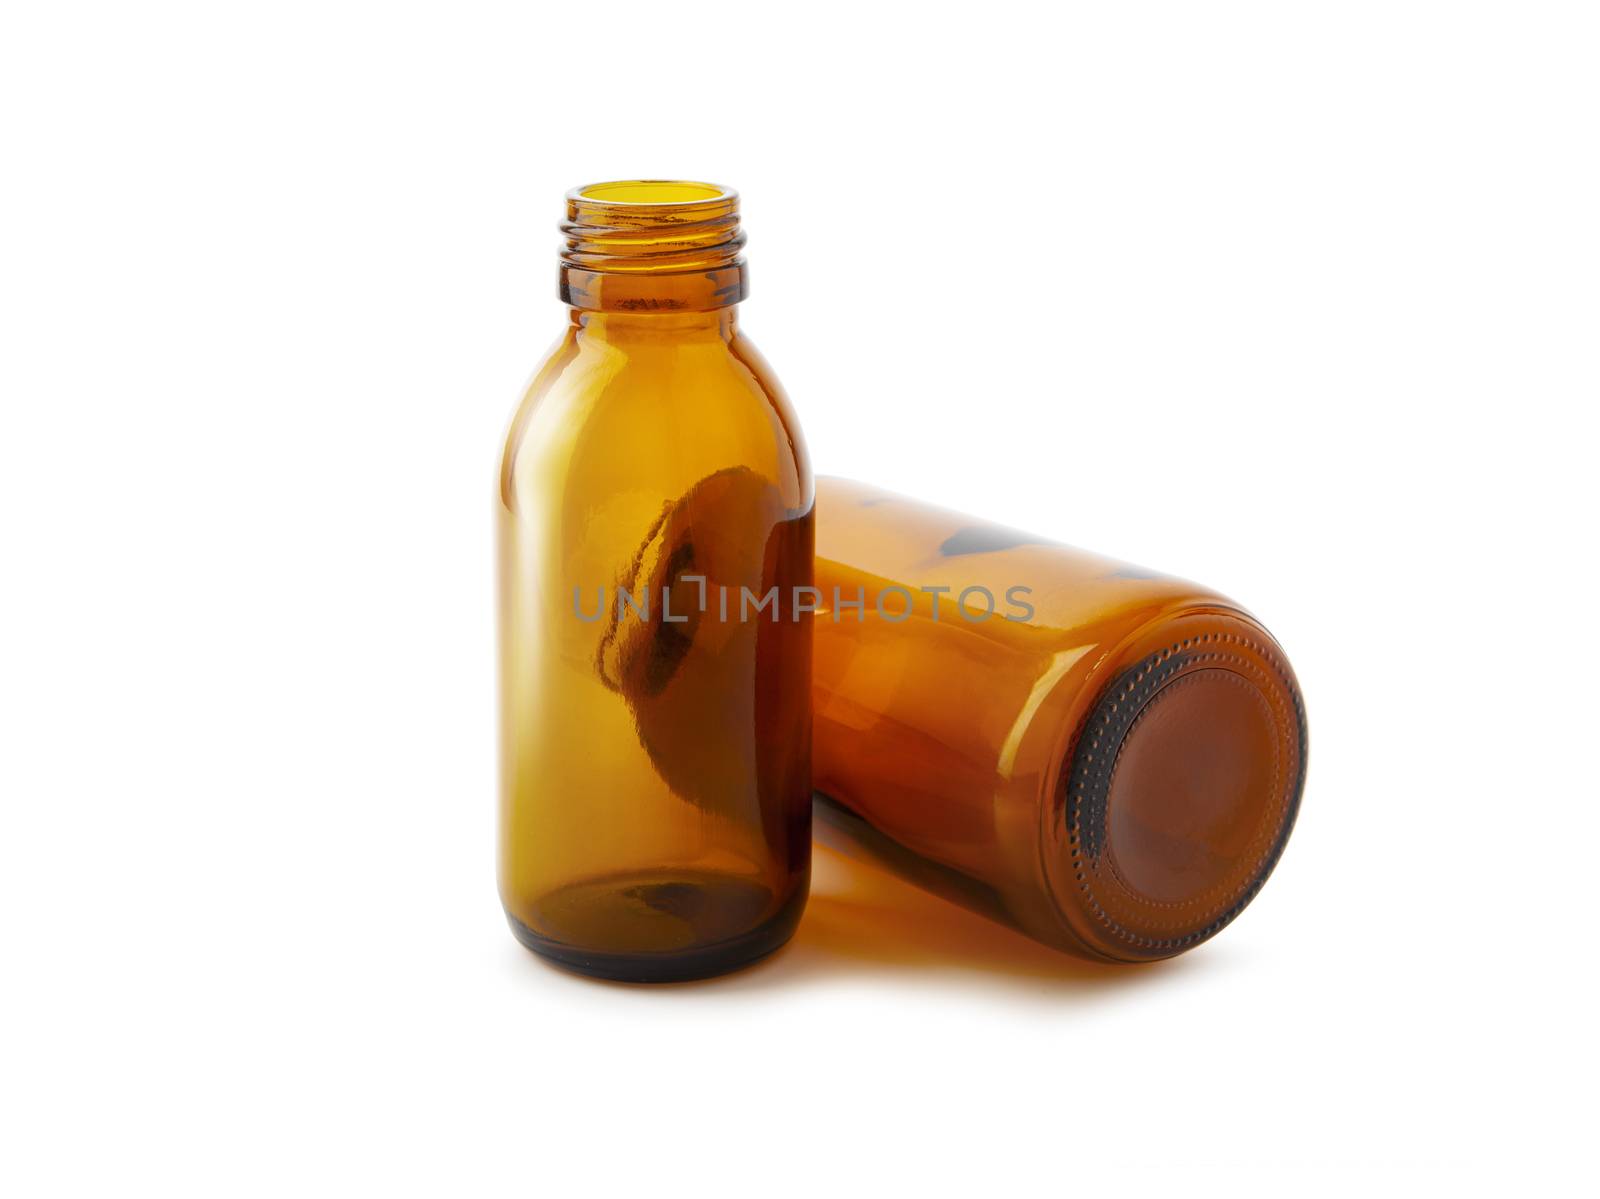 Two medicine bottles close up isolated on white background